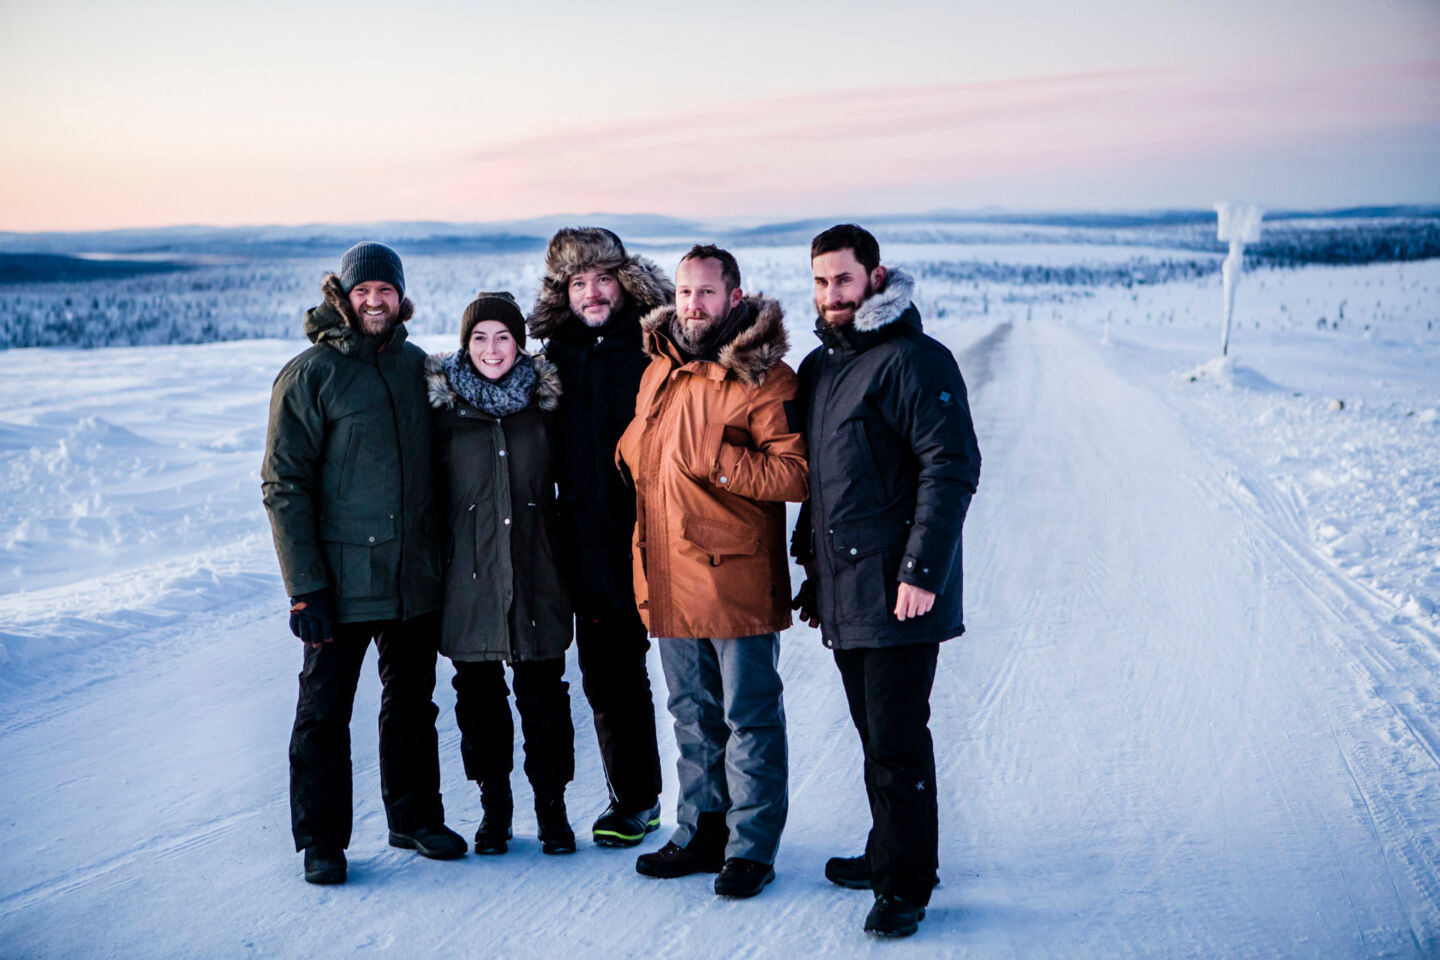 Filming on the fells for Arctic Circle in Finnish Lapland